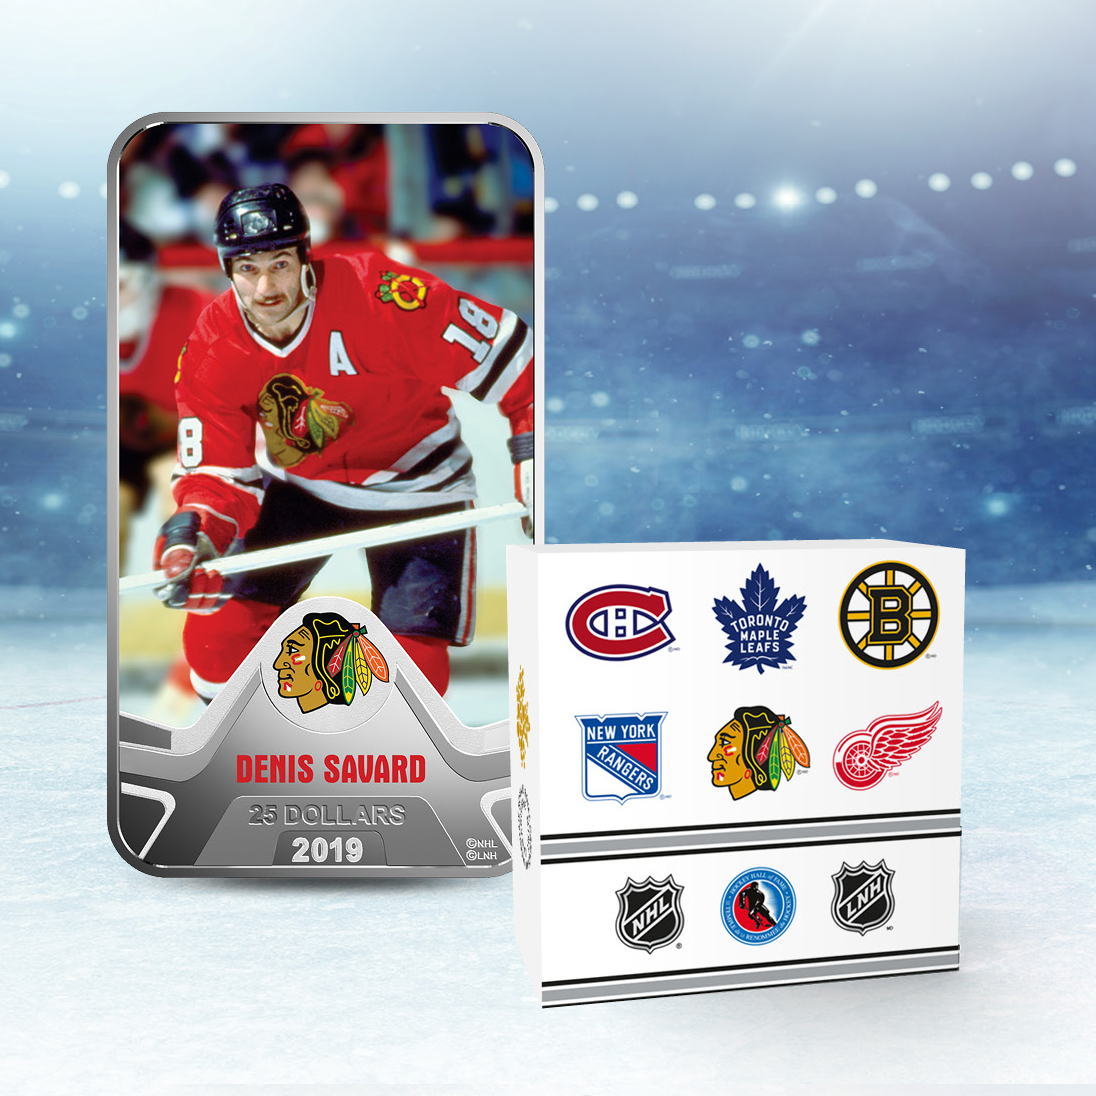 With the third-most points in Chicago Blackhawks history, Denis Savard electrified fans with his speed, offensive flair and innovative “spin-o-rama” move. Yet despite the accolades, he can’t believe he’s sharing a set coins with players like Cournoyer.